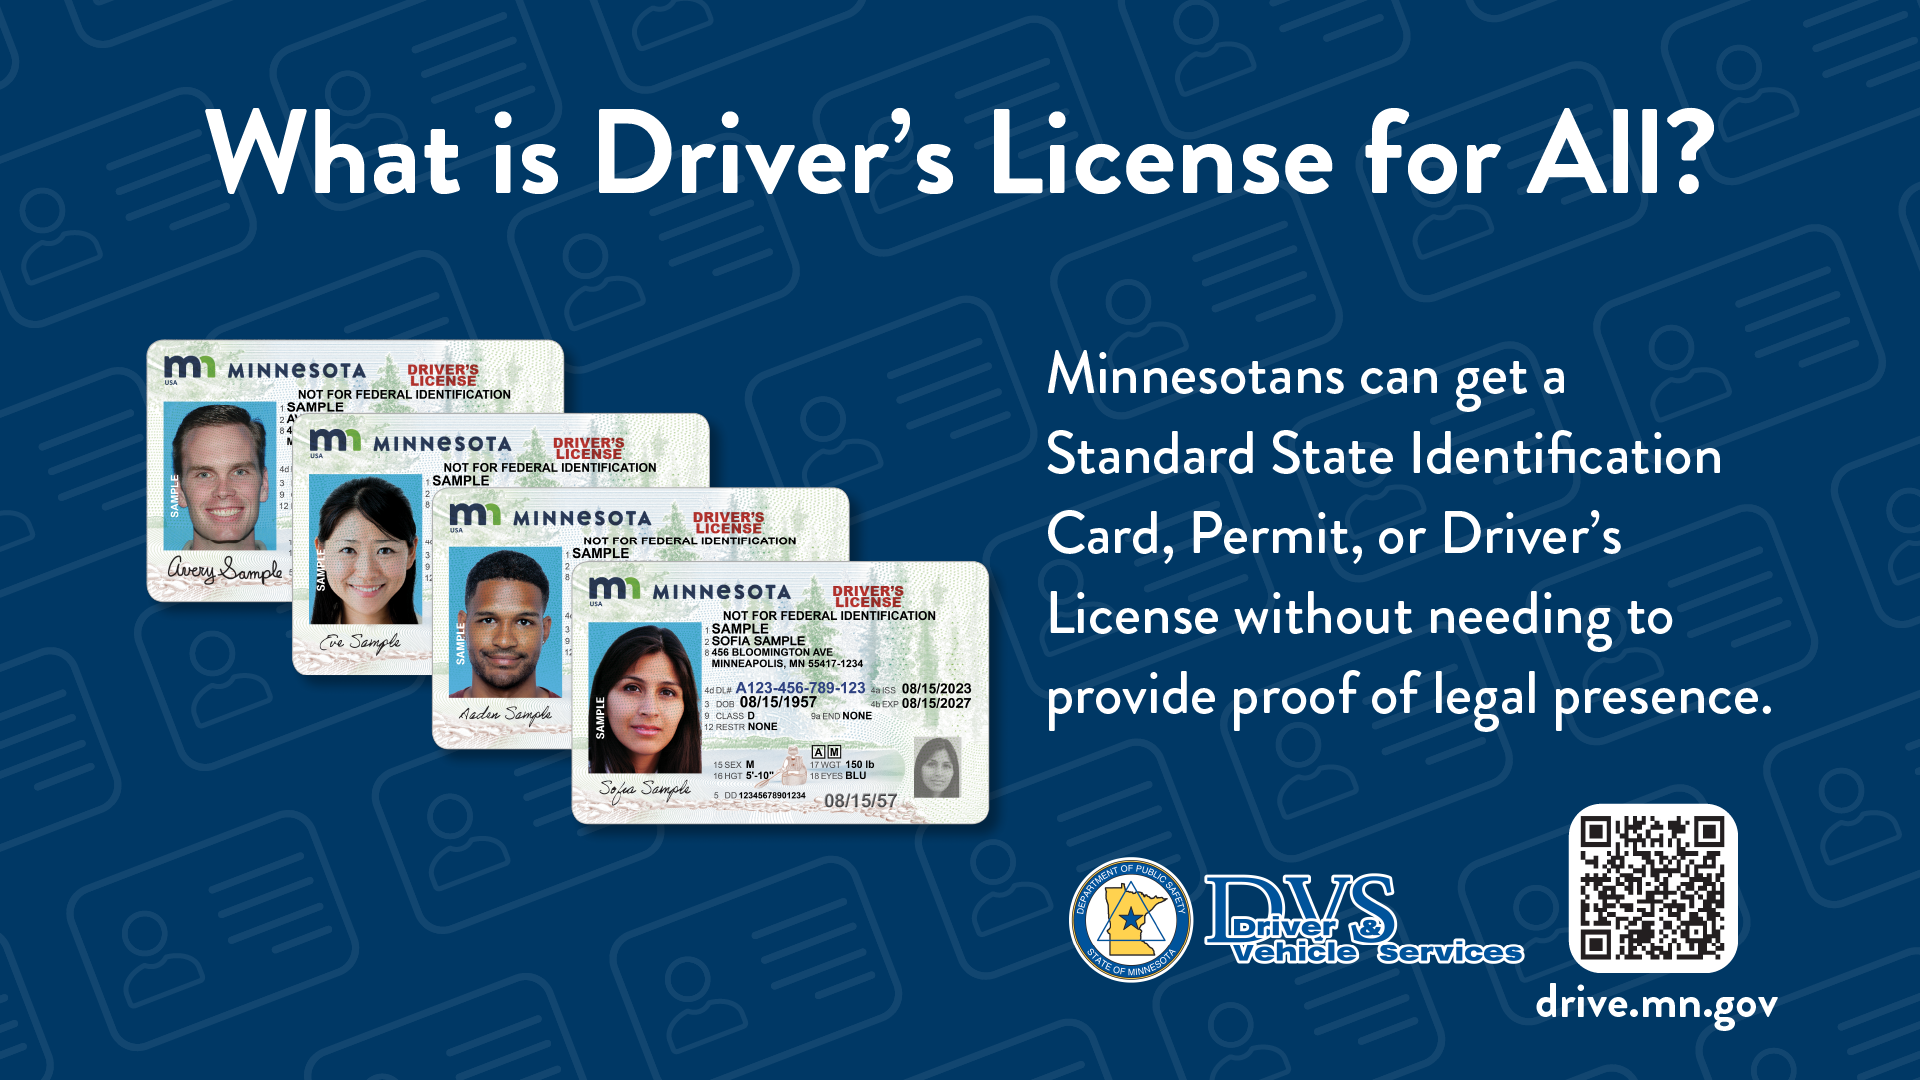 Buy New York State Driver License Online